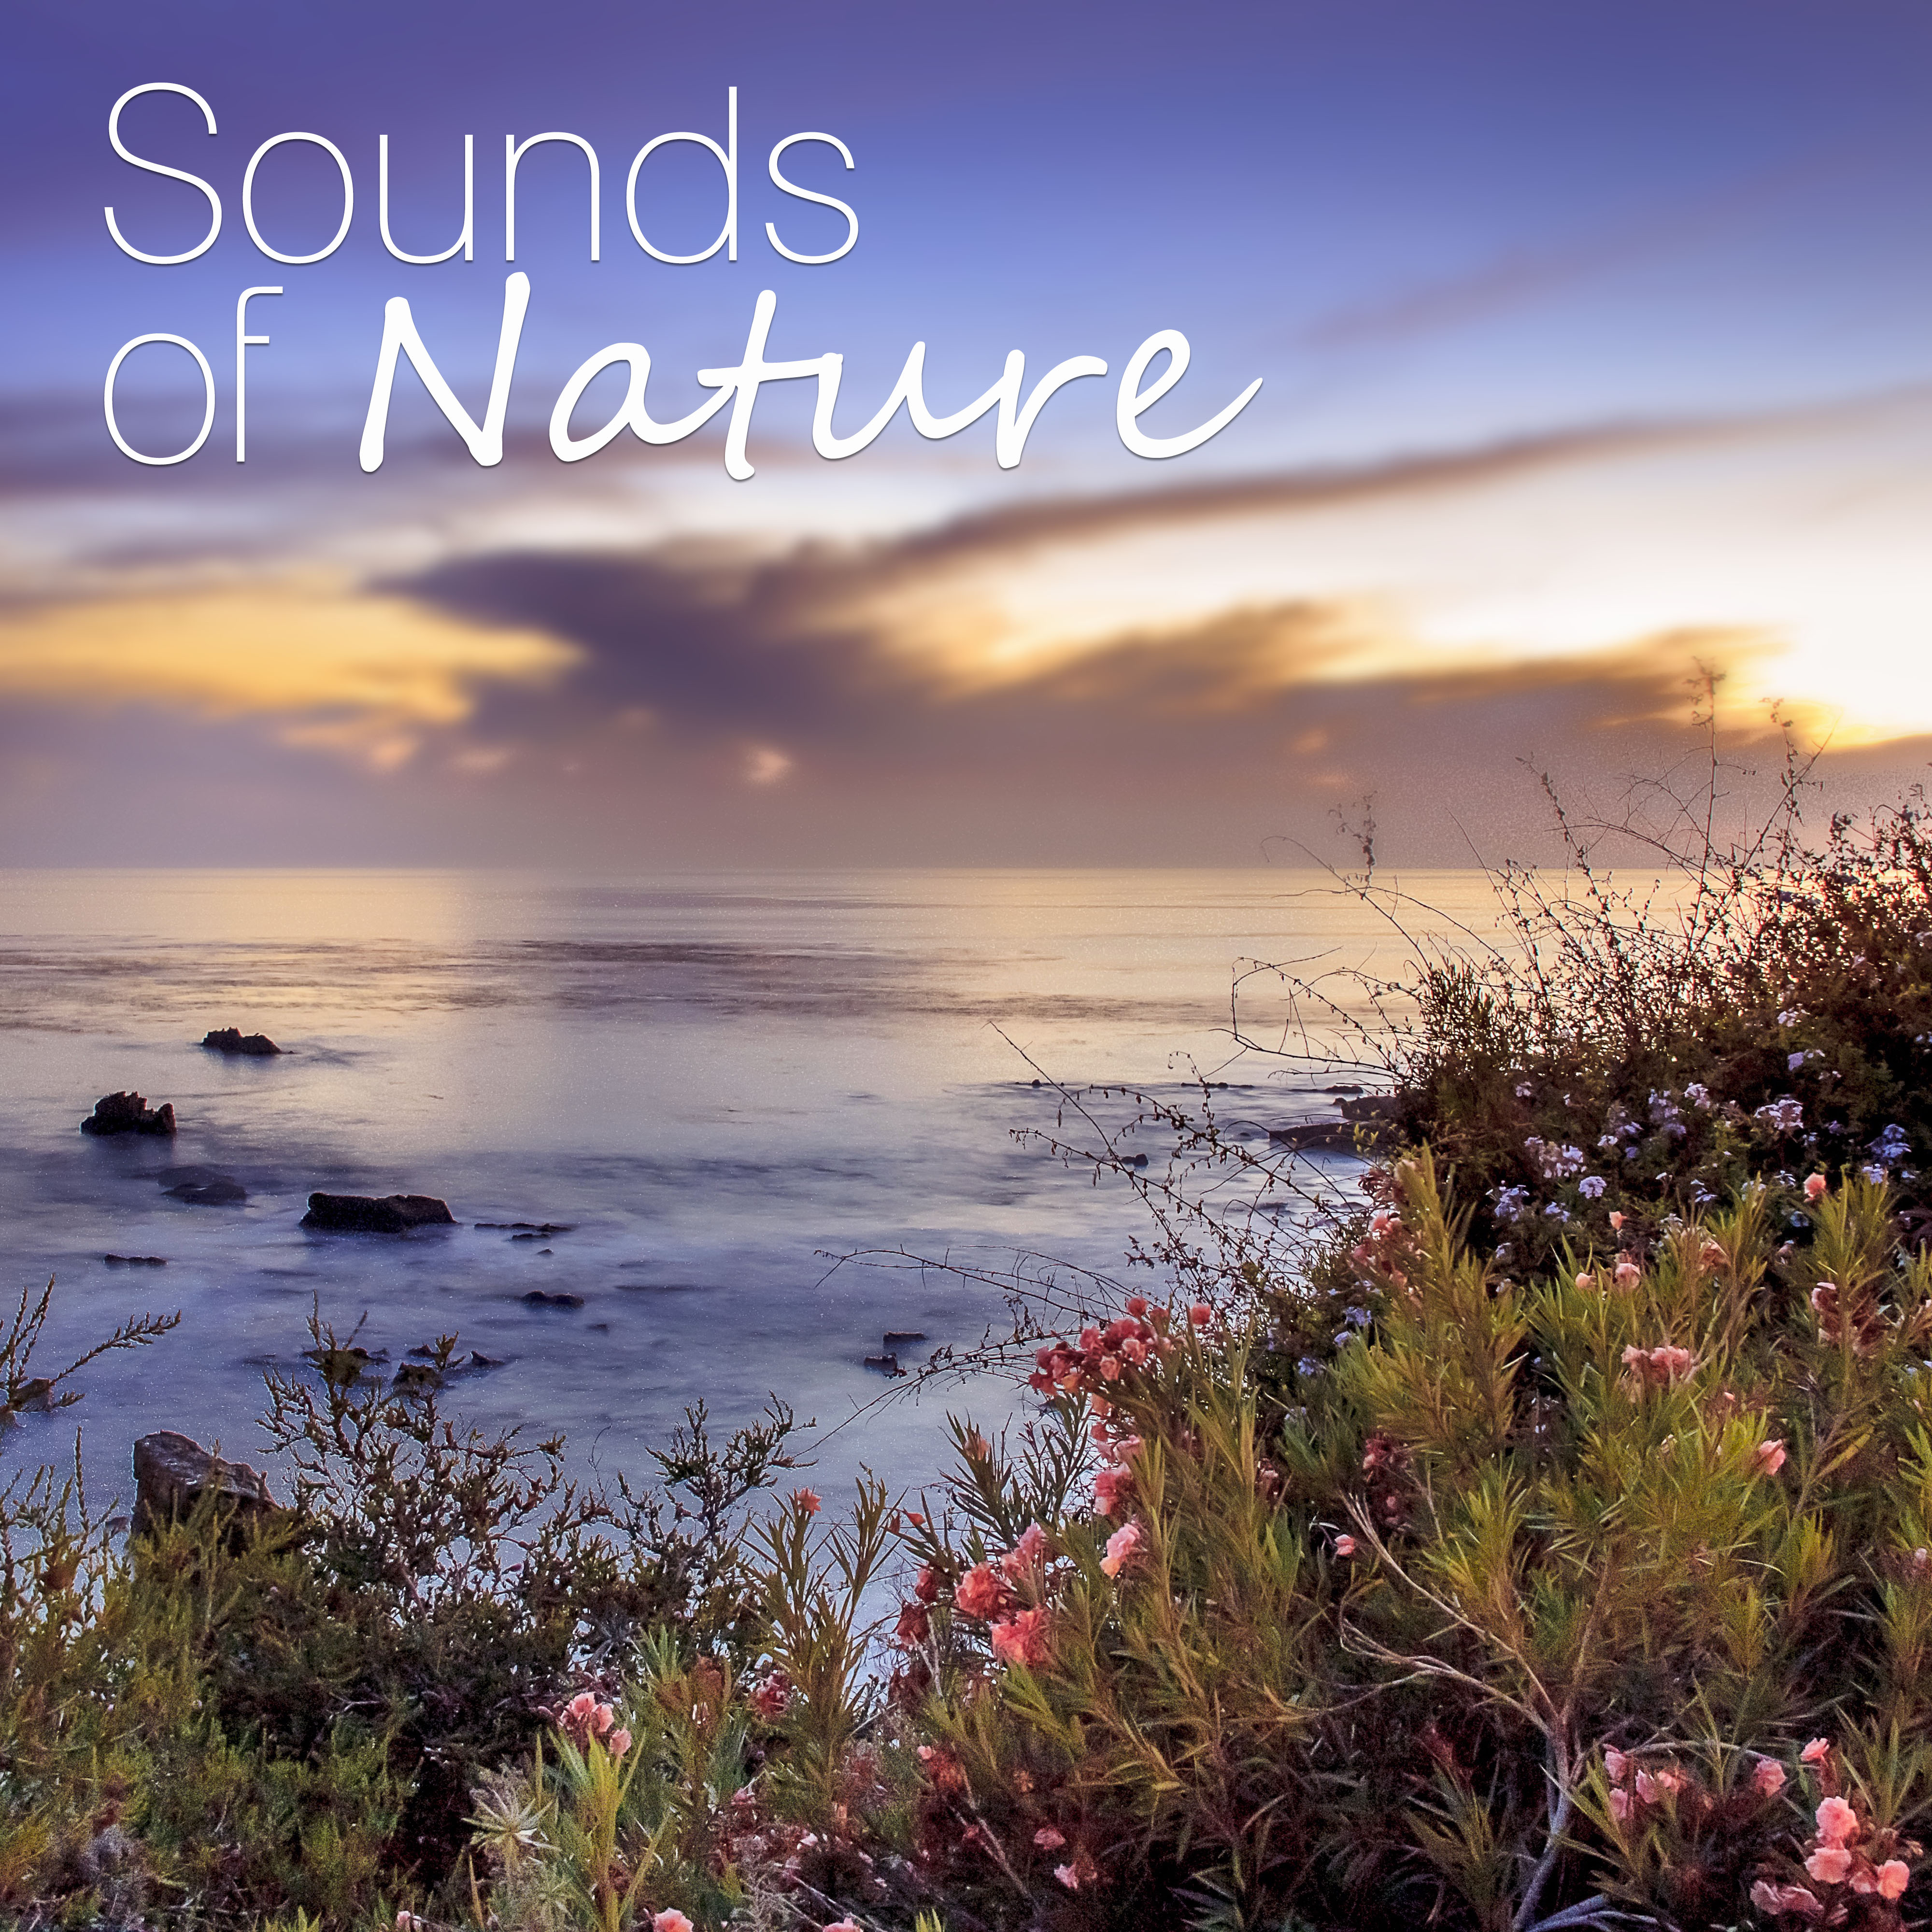 Sounds of Nature – Ambient Nature Sounds for Relax, Meditation, Sleep